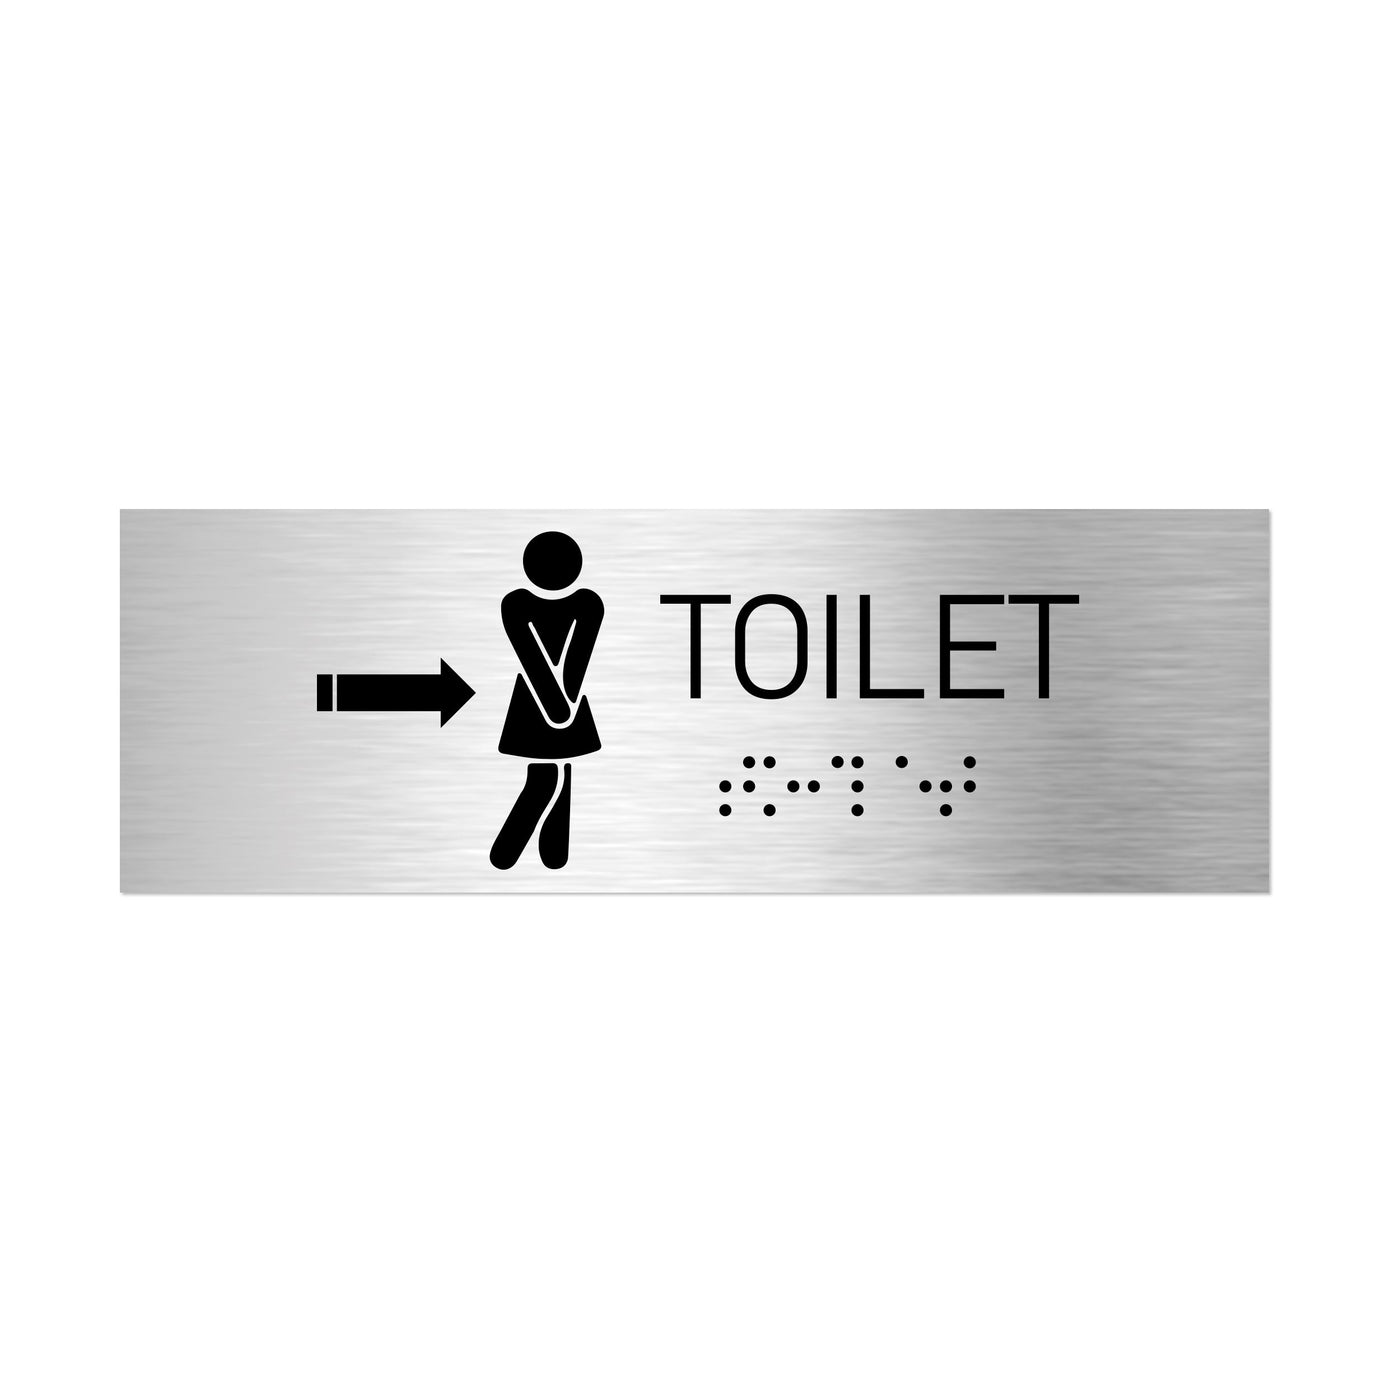 Bathroom Signs - Women Toilet Signs With Braille - Stainless Steel